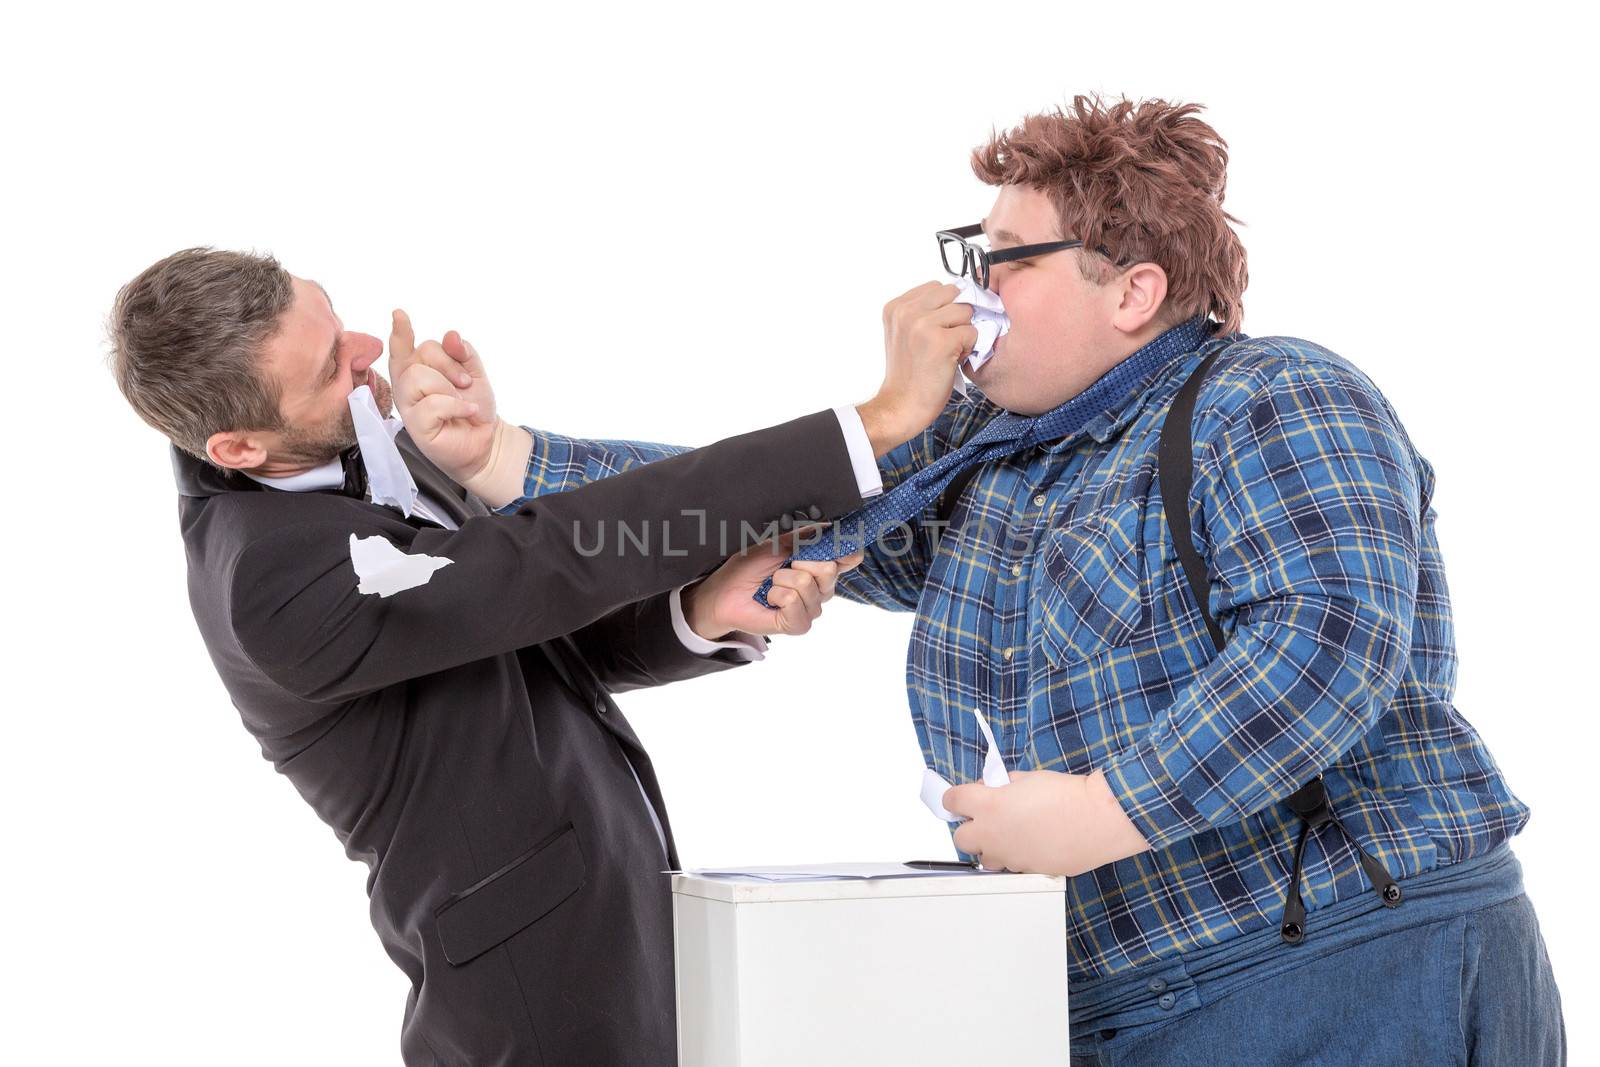 Two men resorting to fisticuffs by Discovod